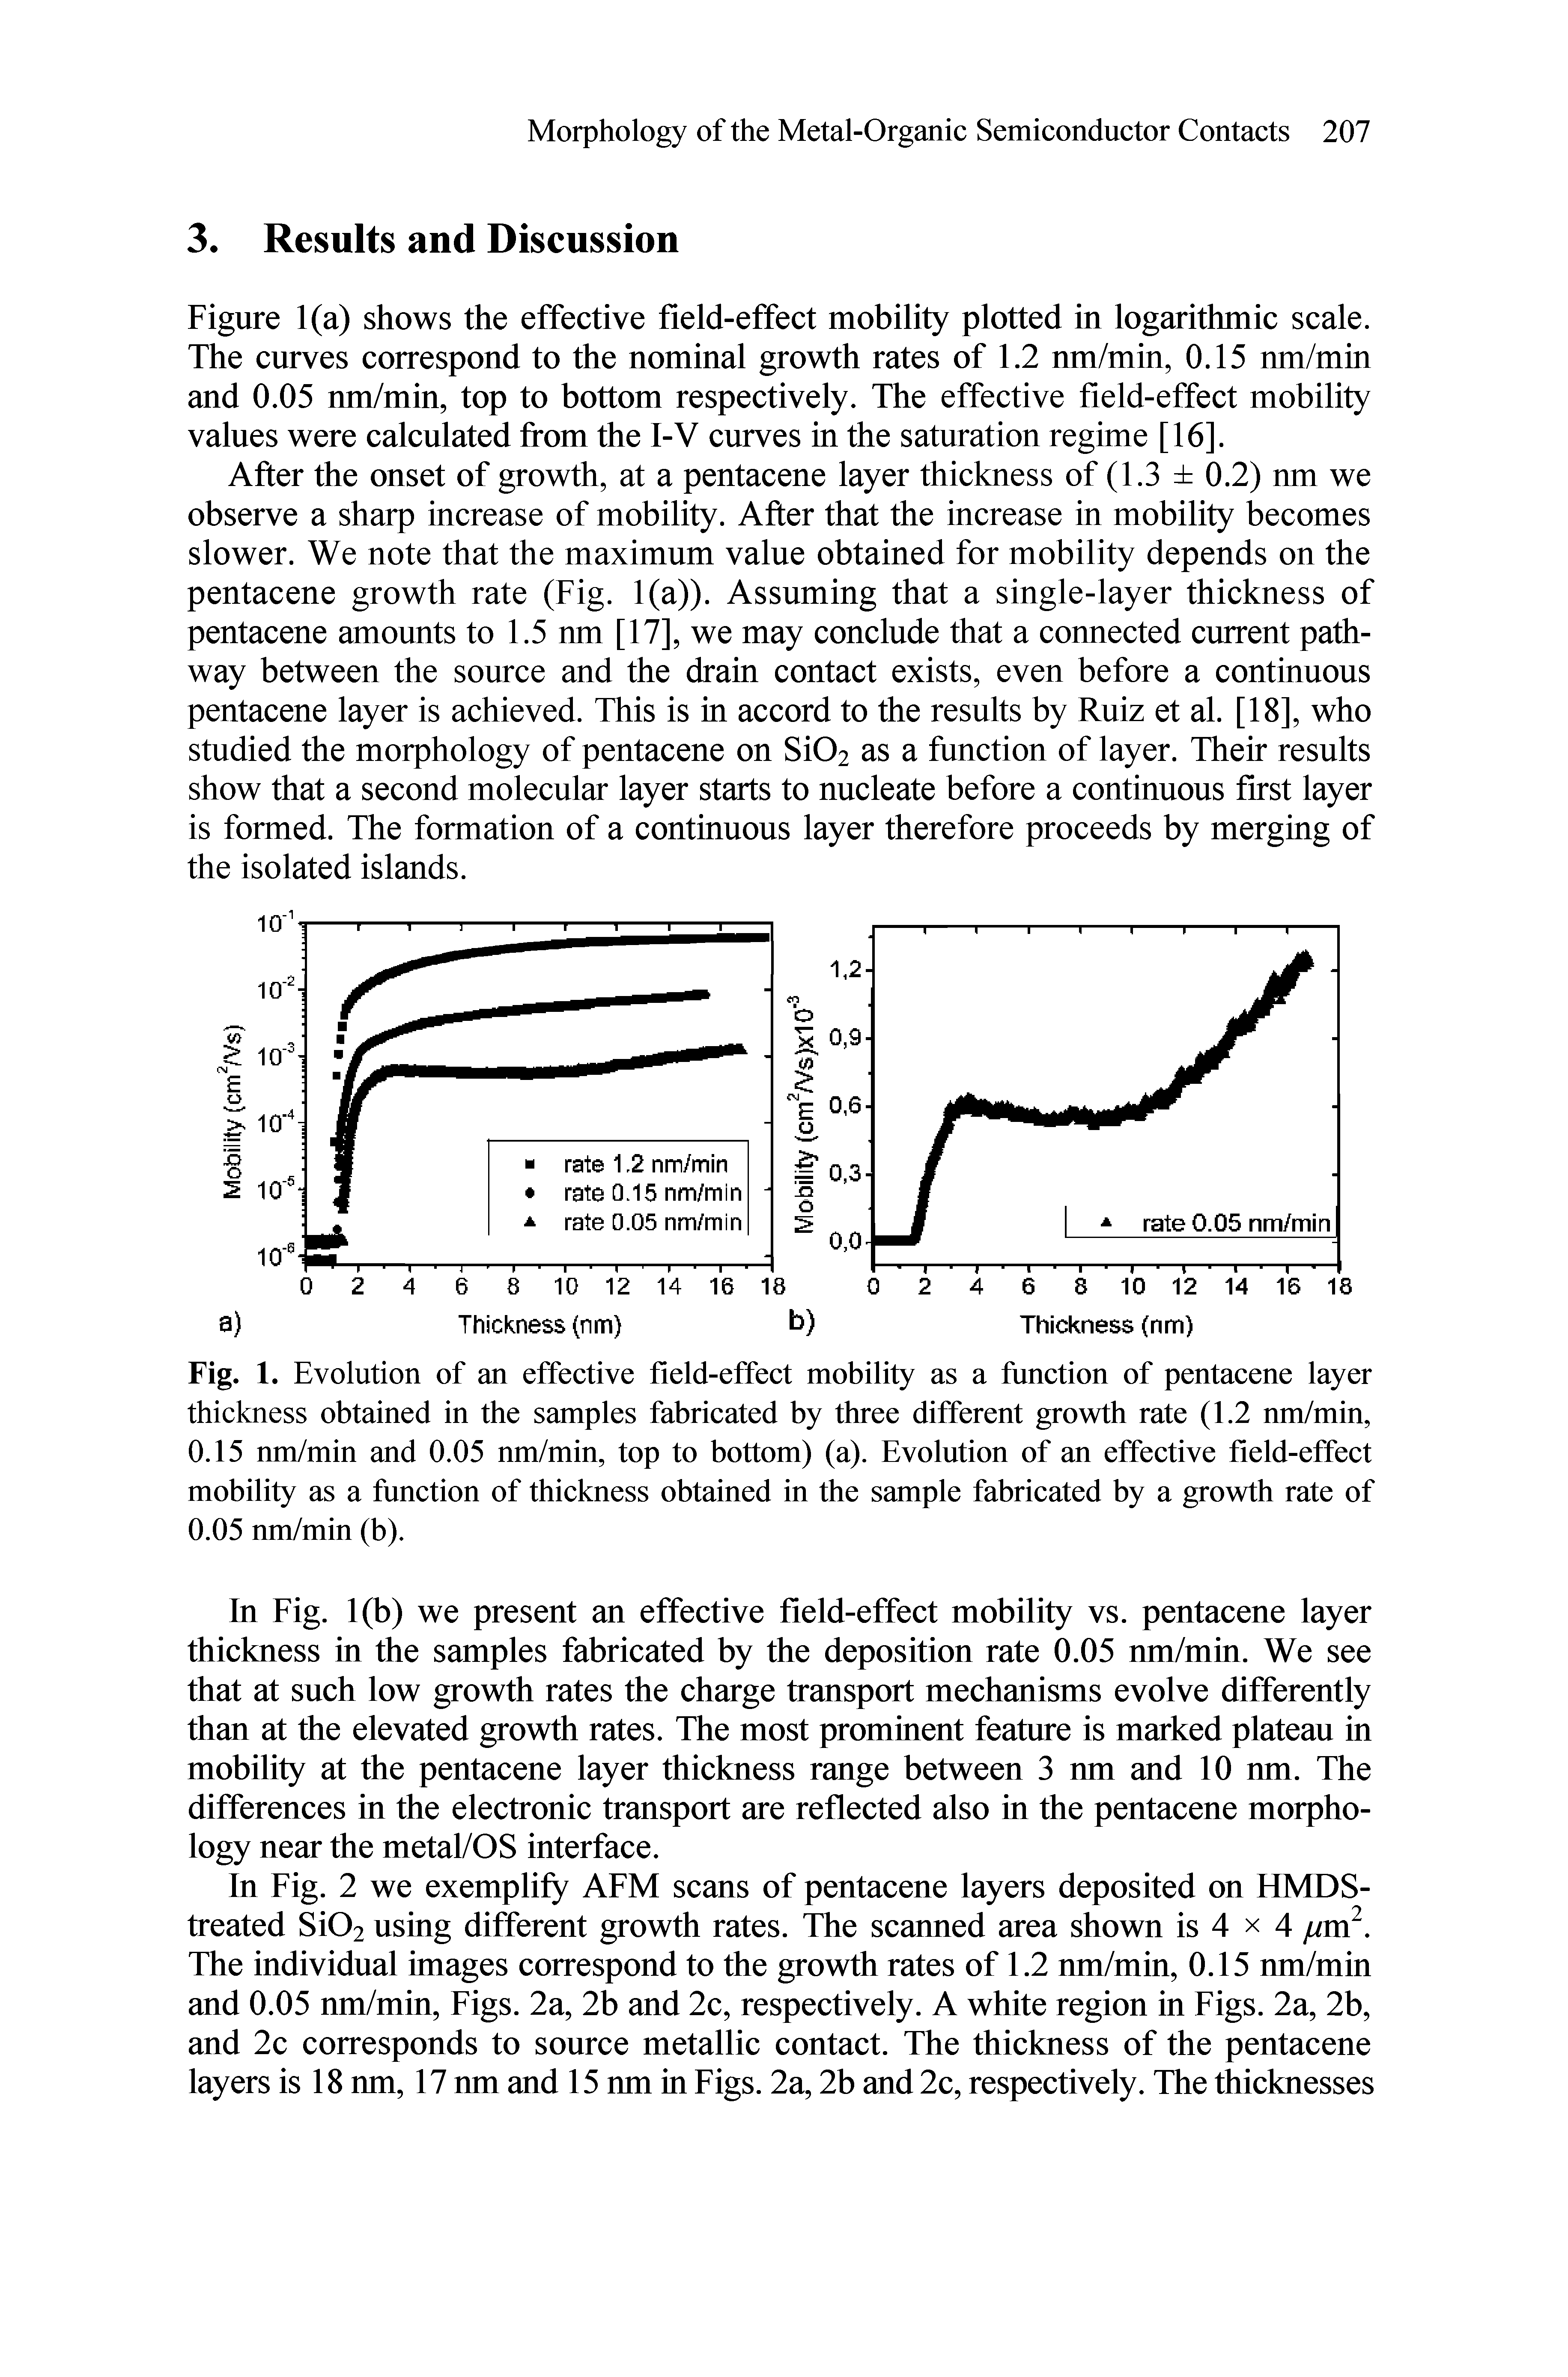 Fig. 1. Evolution of an effective field-effect mobility as a function of pentacene layer thickness obtained in the samples fabricated by three different growth rate (1.2 nm/min, 0.15 nm/min and 0.05 nm/min, top to bottom) (a). Evolution of an effective field-effect mobility as a function of thickness obtained in the sample fabricated by a growth rate of 0.05 nm/min (b).